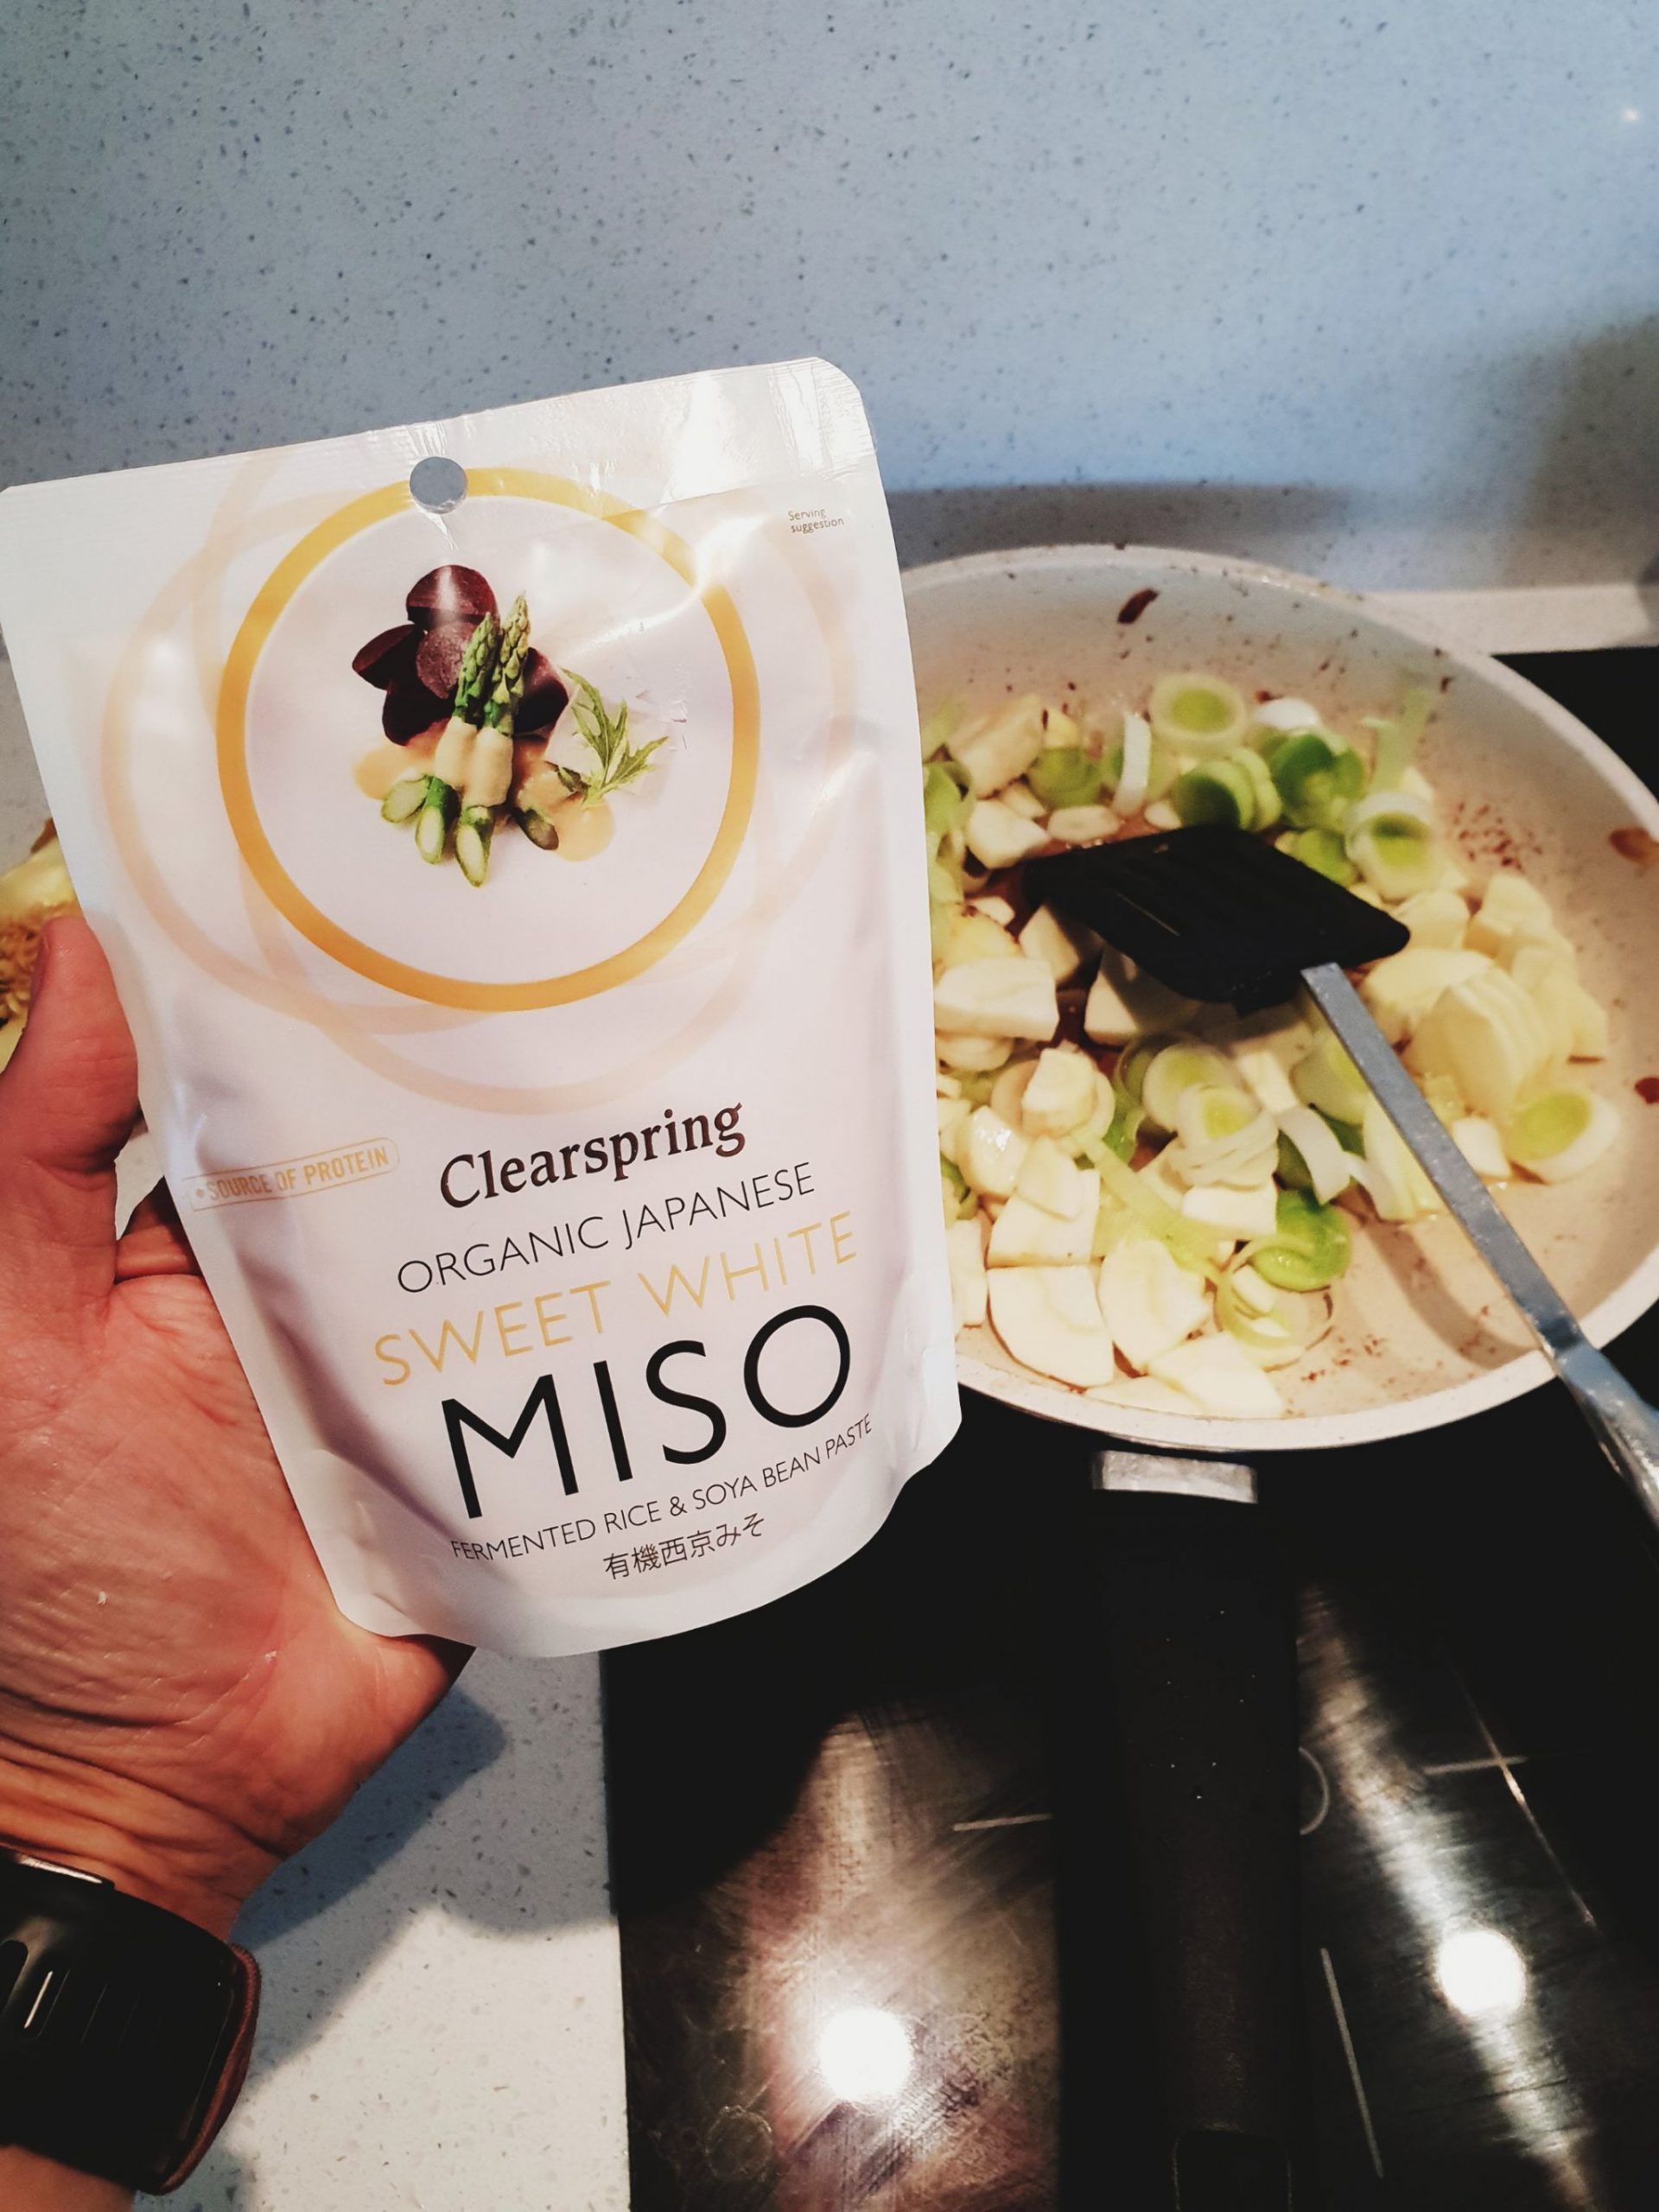 Miso paste is a great alternative to meat stocks